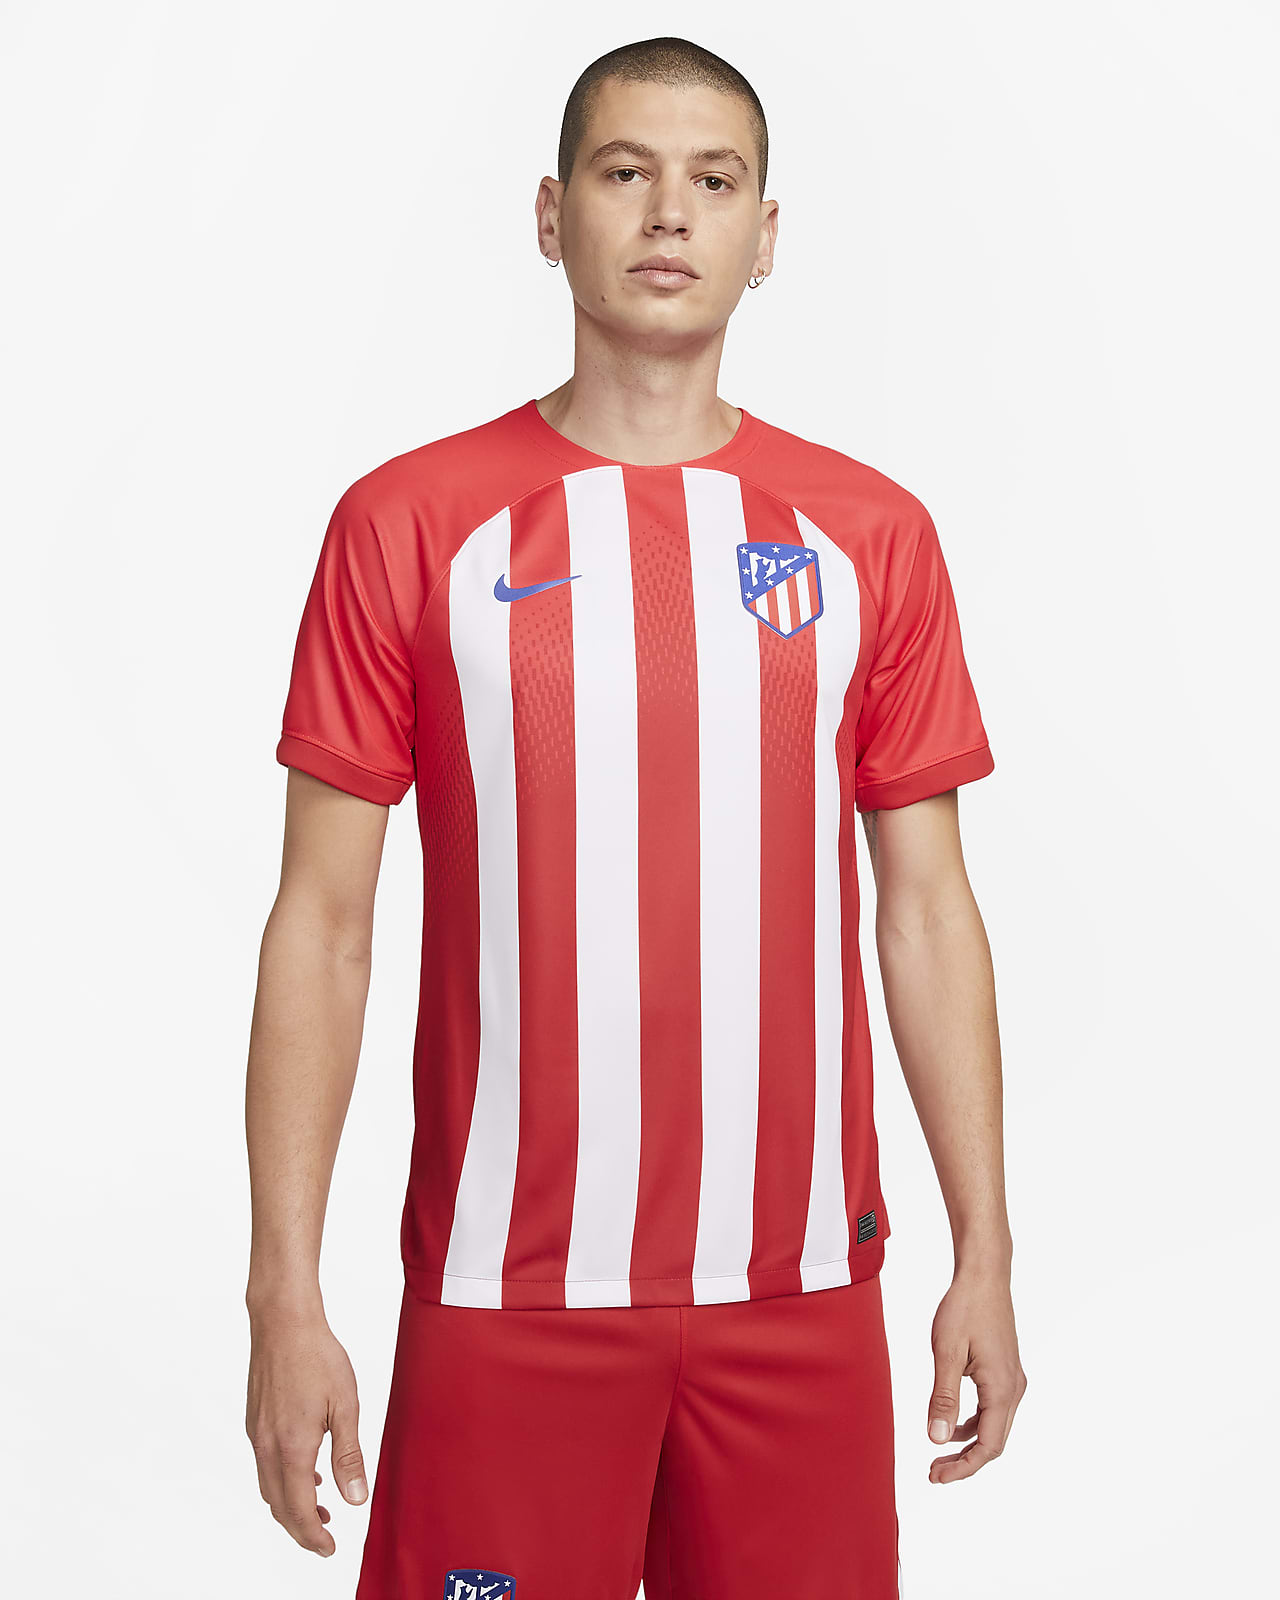 atletico madrid outfit